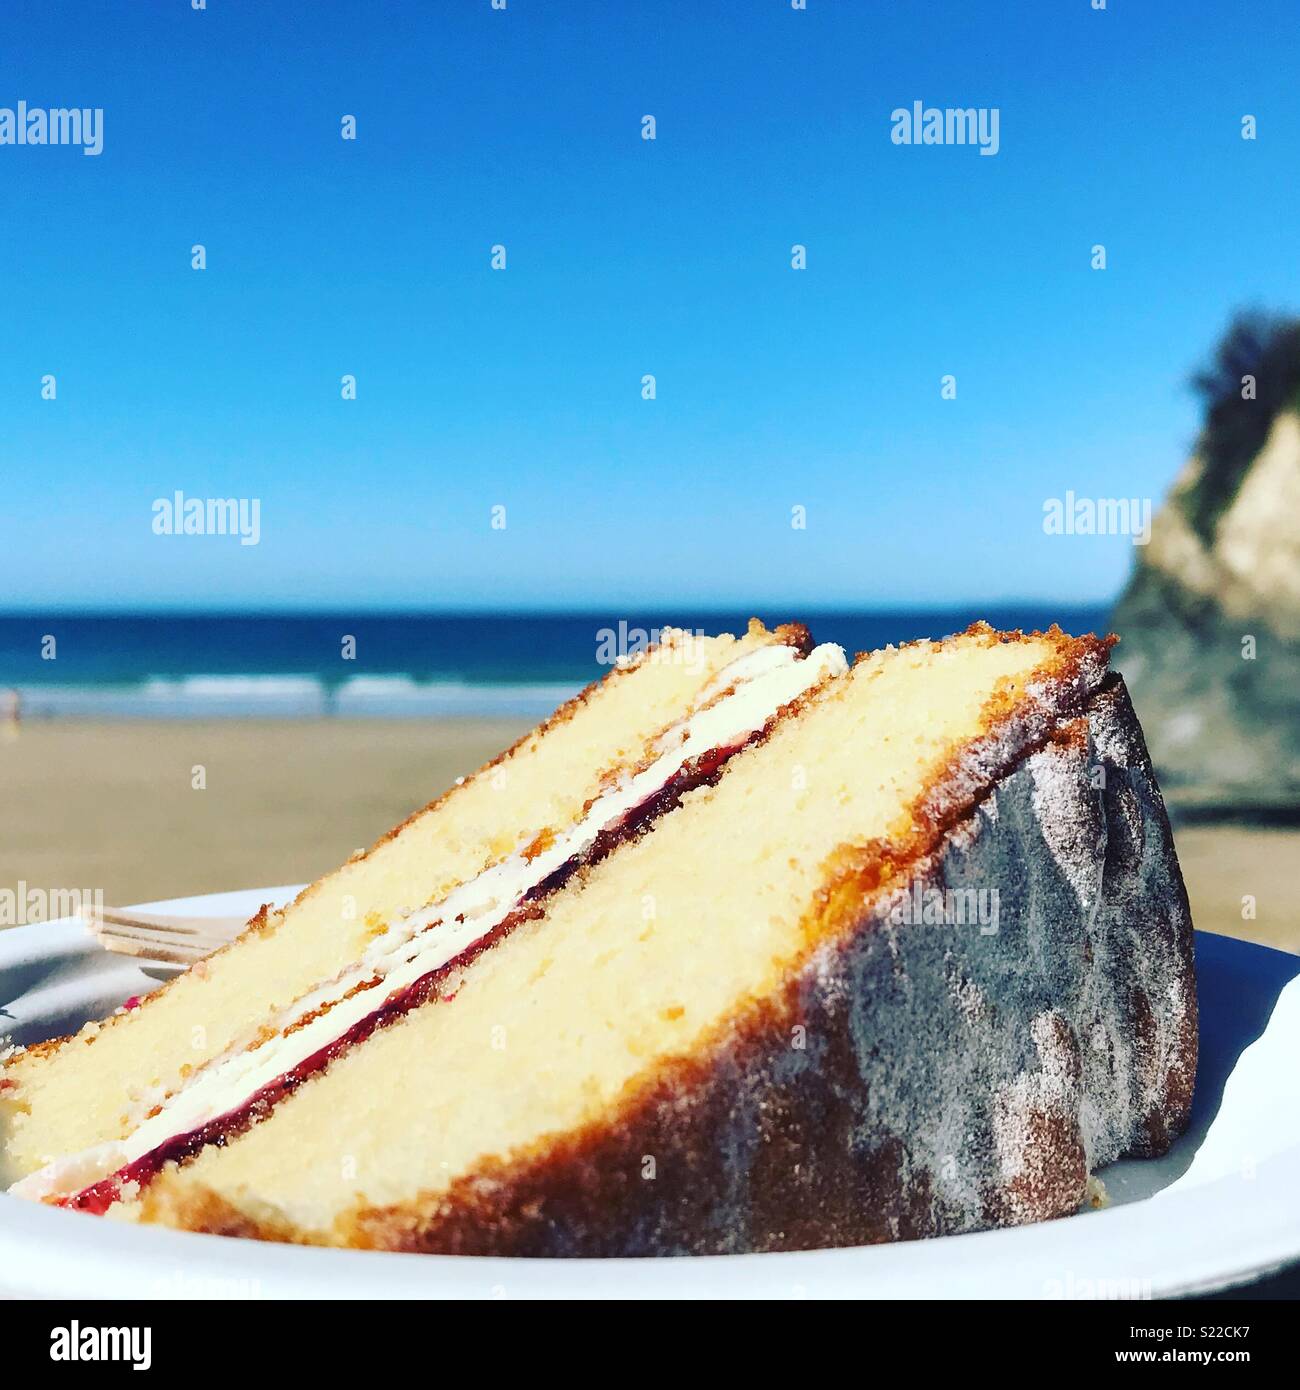 Cake by the Ocean Stock Photo - Alamy